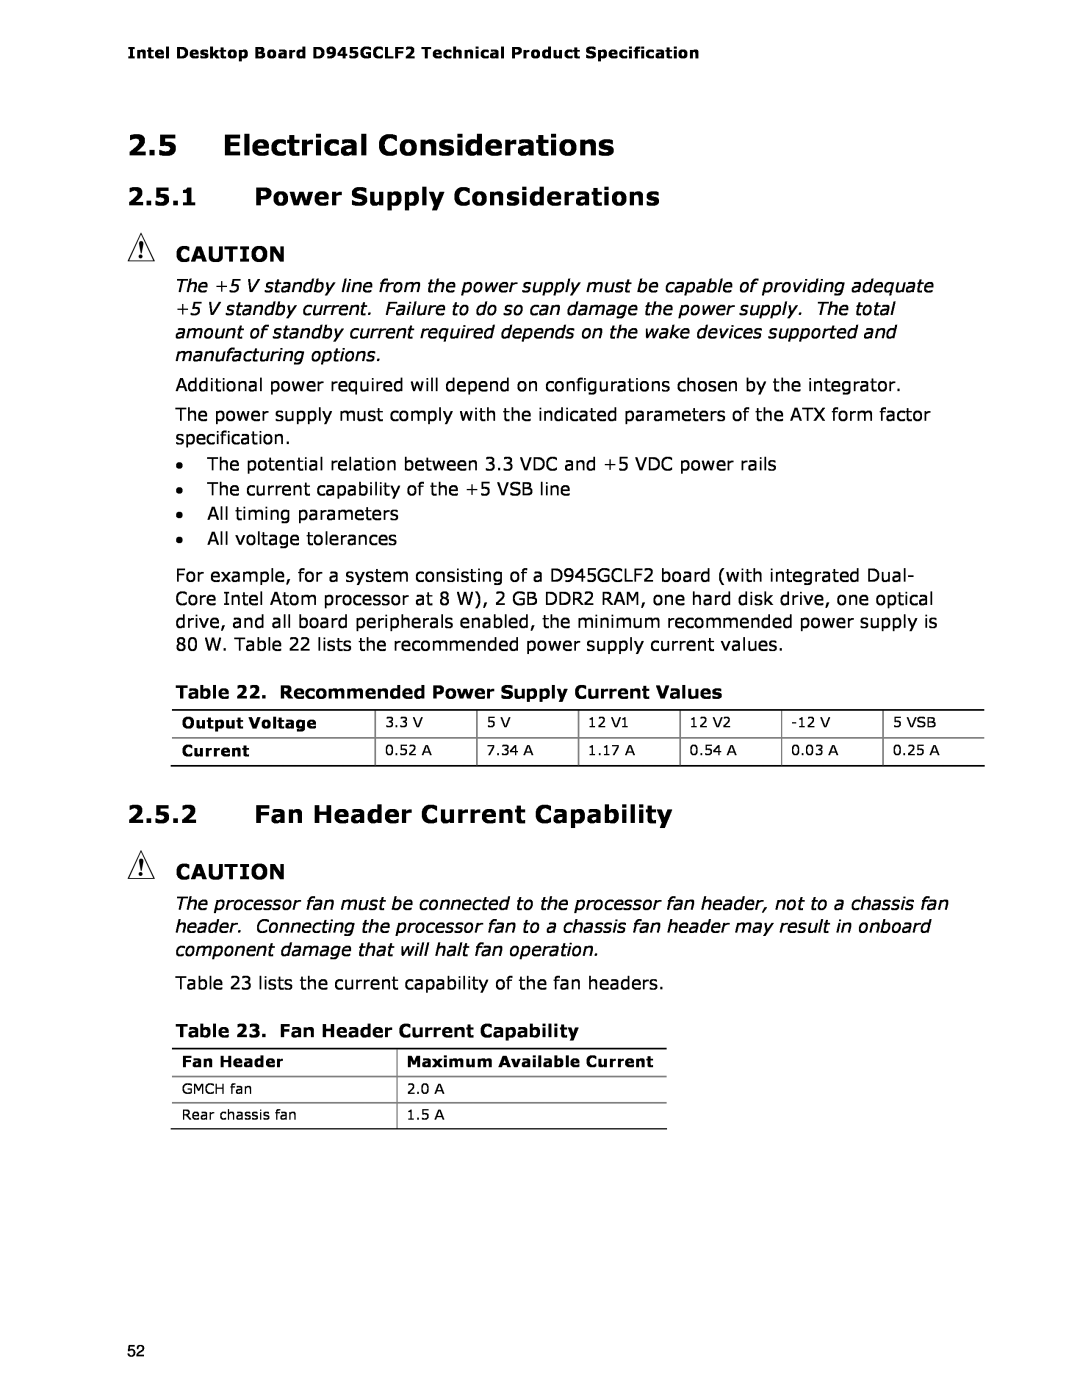 Intel D945GCLF2 specifications Electrical Considerations, Power Supply Considerations, Fan Header Current Capability 